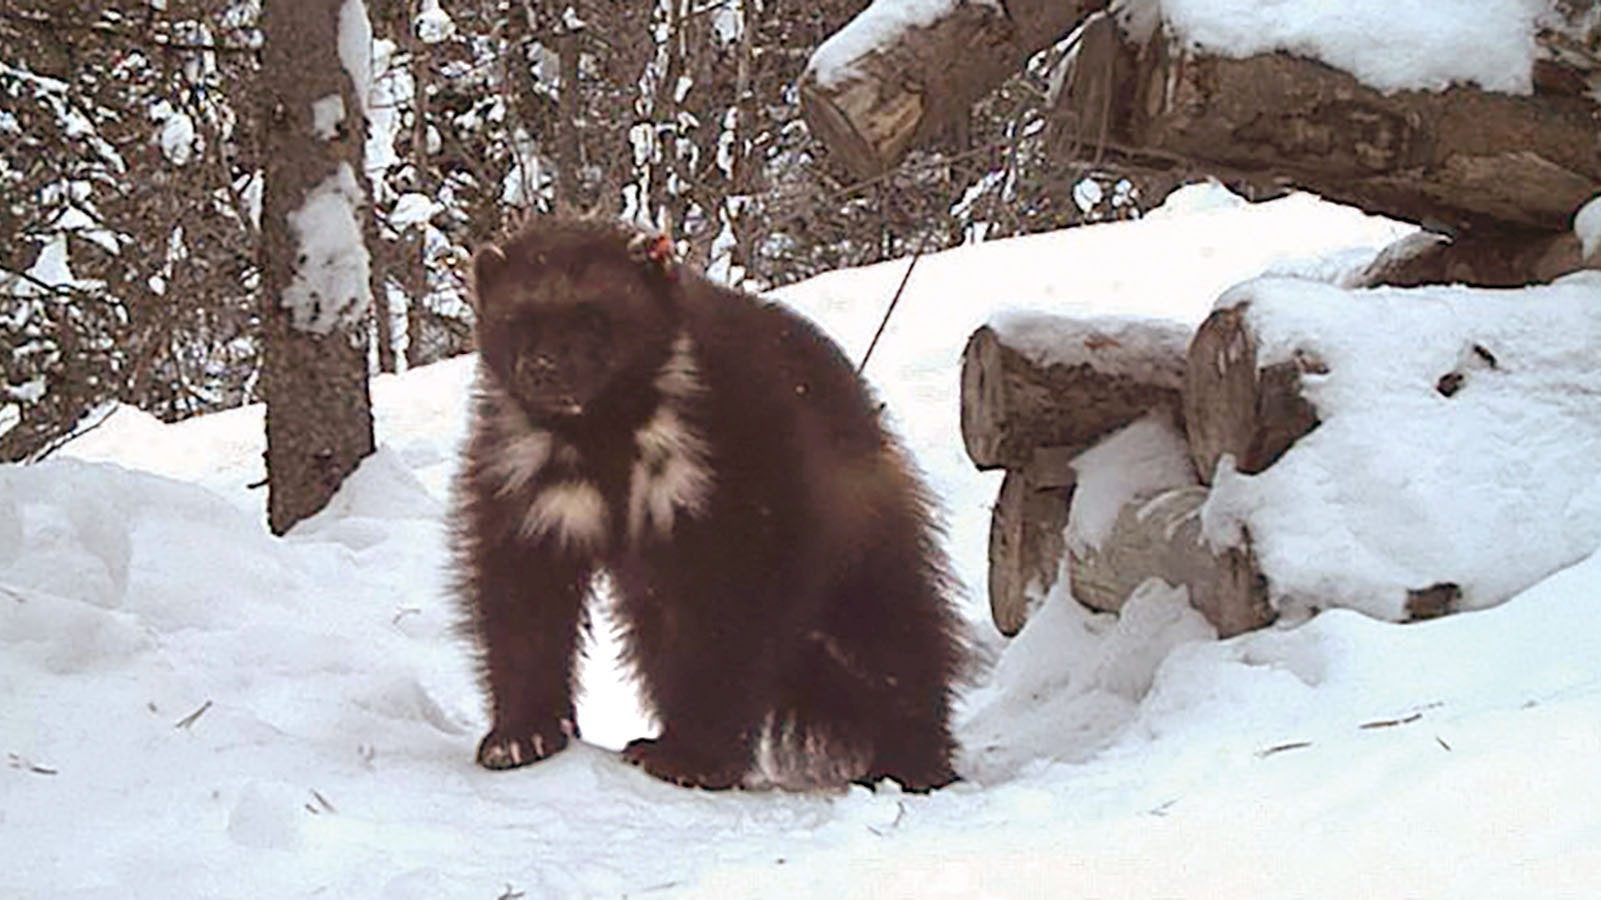 A wolverine photographed in the Greater Yellowstone area.